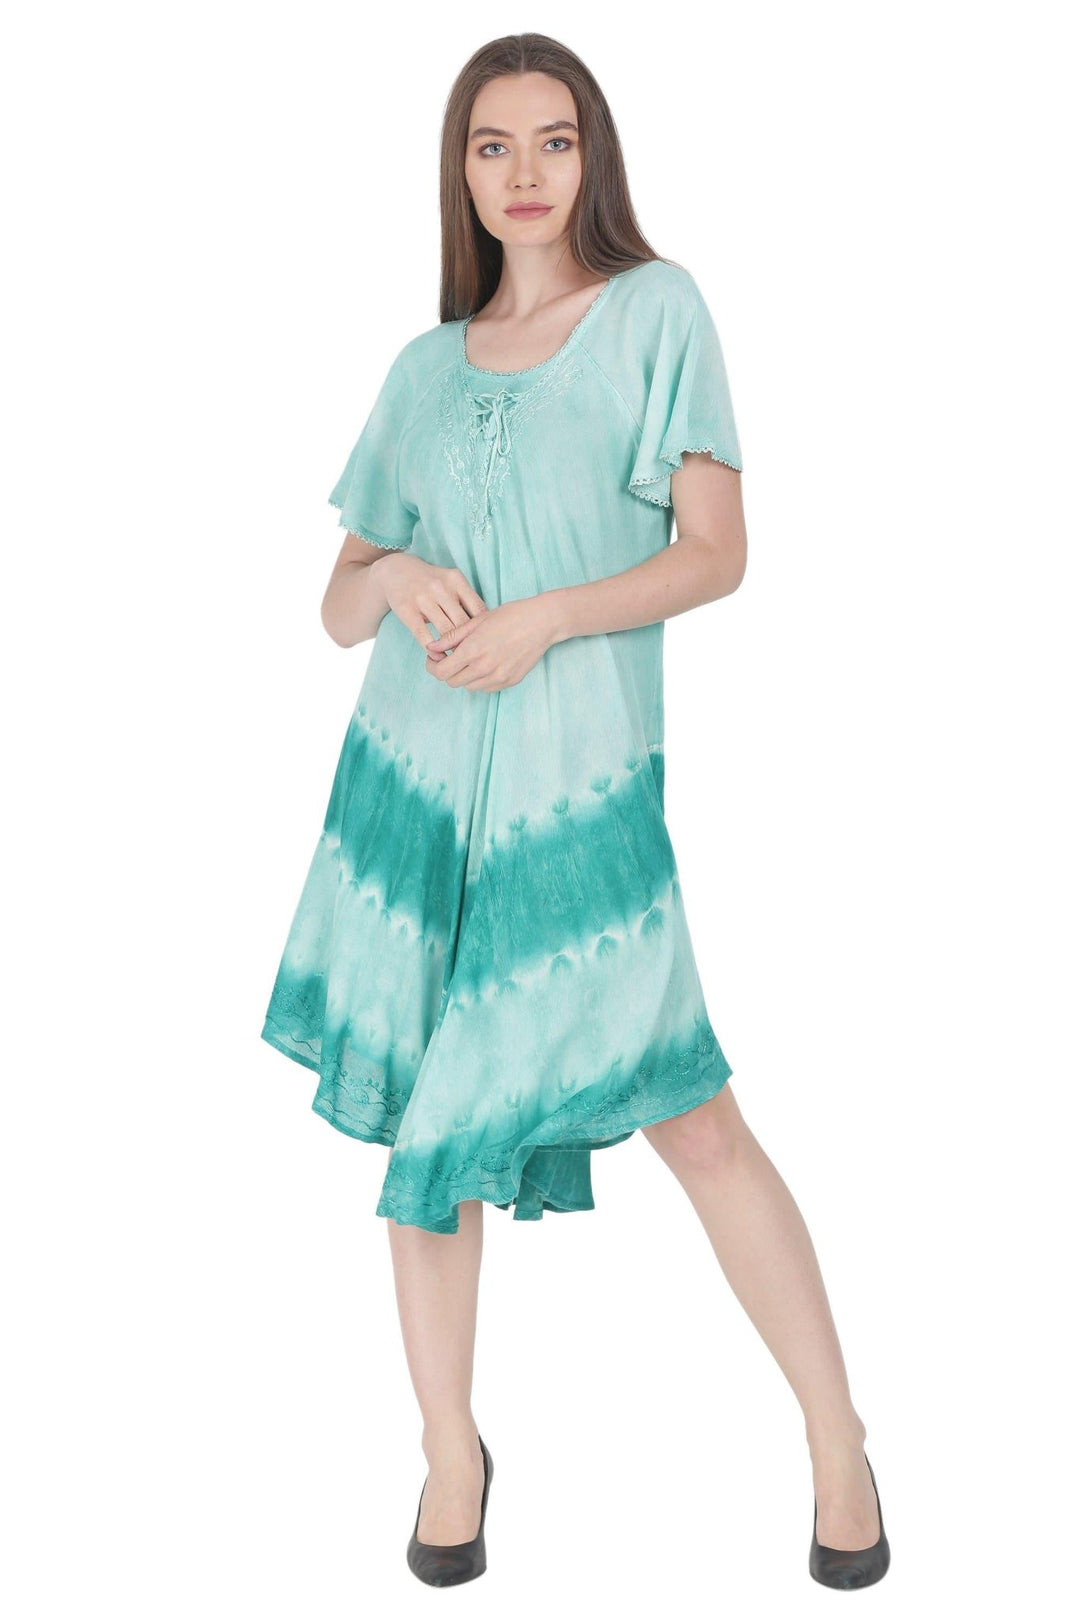 Subdued Tie Dye Trapeze Dress w/ Sleeves UDS48-2402 - Advance Apparels Inc